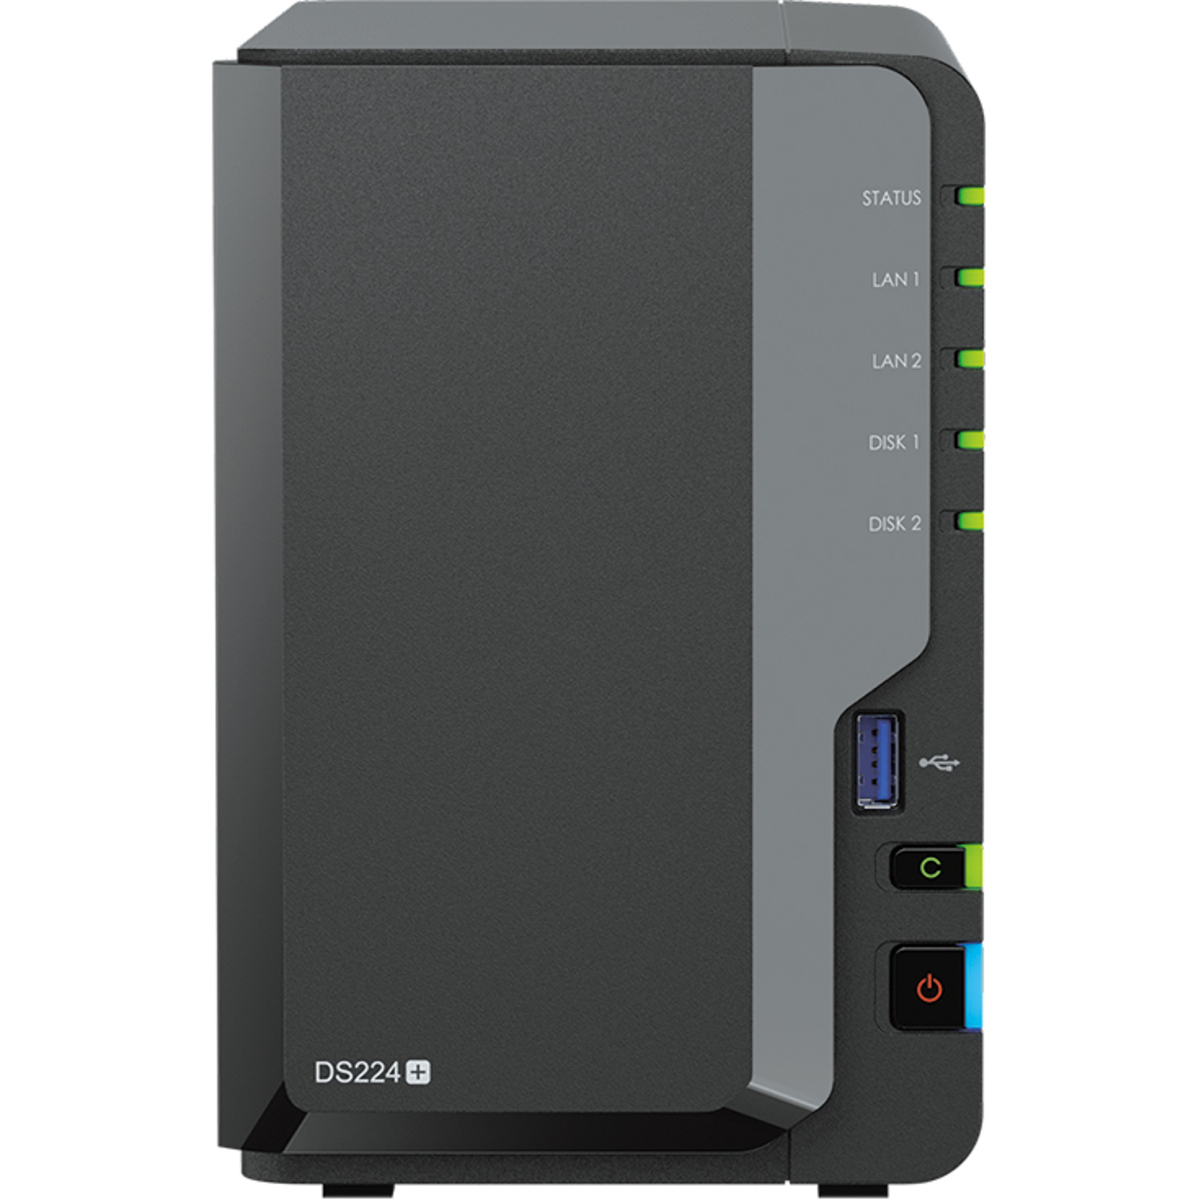 Synology DiskStation DS224+ 48tb 2-Bay Desktop Personal / Basic Home / Small Office NAS - Network Attached Storage Device 2x24tb Seagate EXOS X24 ST24000NM002H 3.5 7200rpm SATA 6Gb/s HDD ENTERPRISE Class Drives Installed - Burn-In Tested - ON SALE - FREE RAM UPGRADE DiskStation DS224+